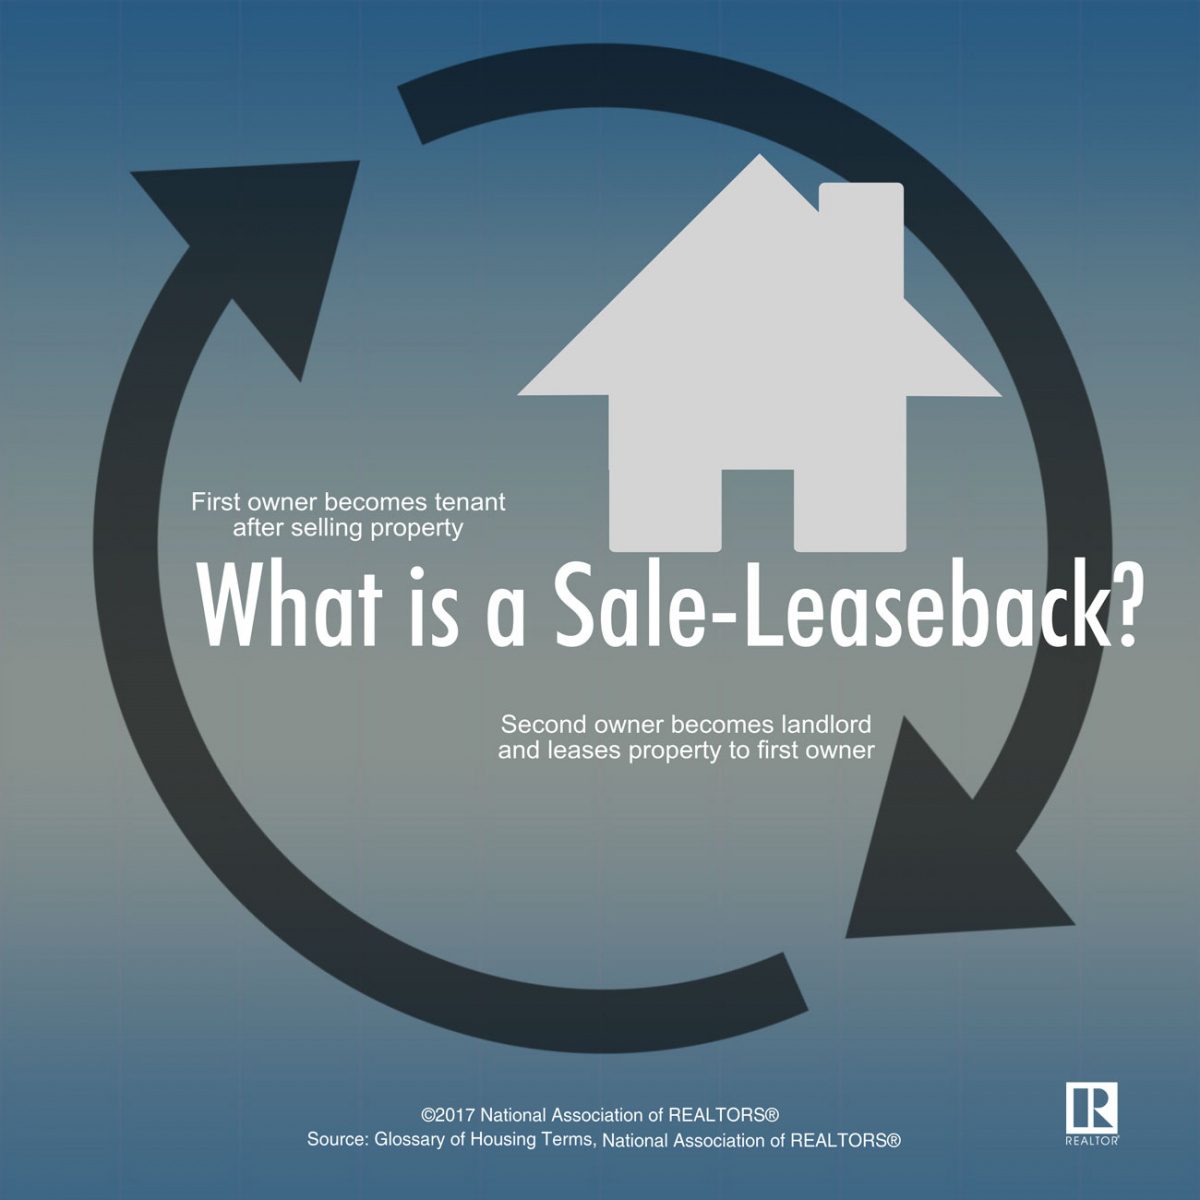 What is a Sale-Leaseback